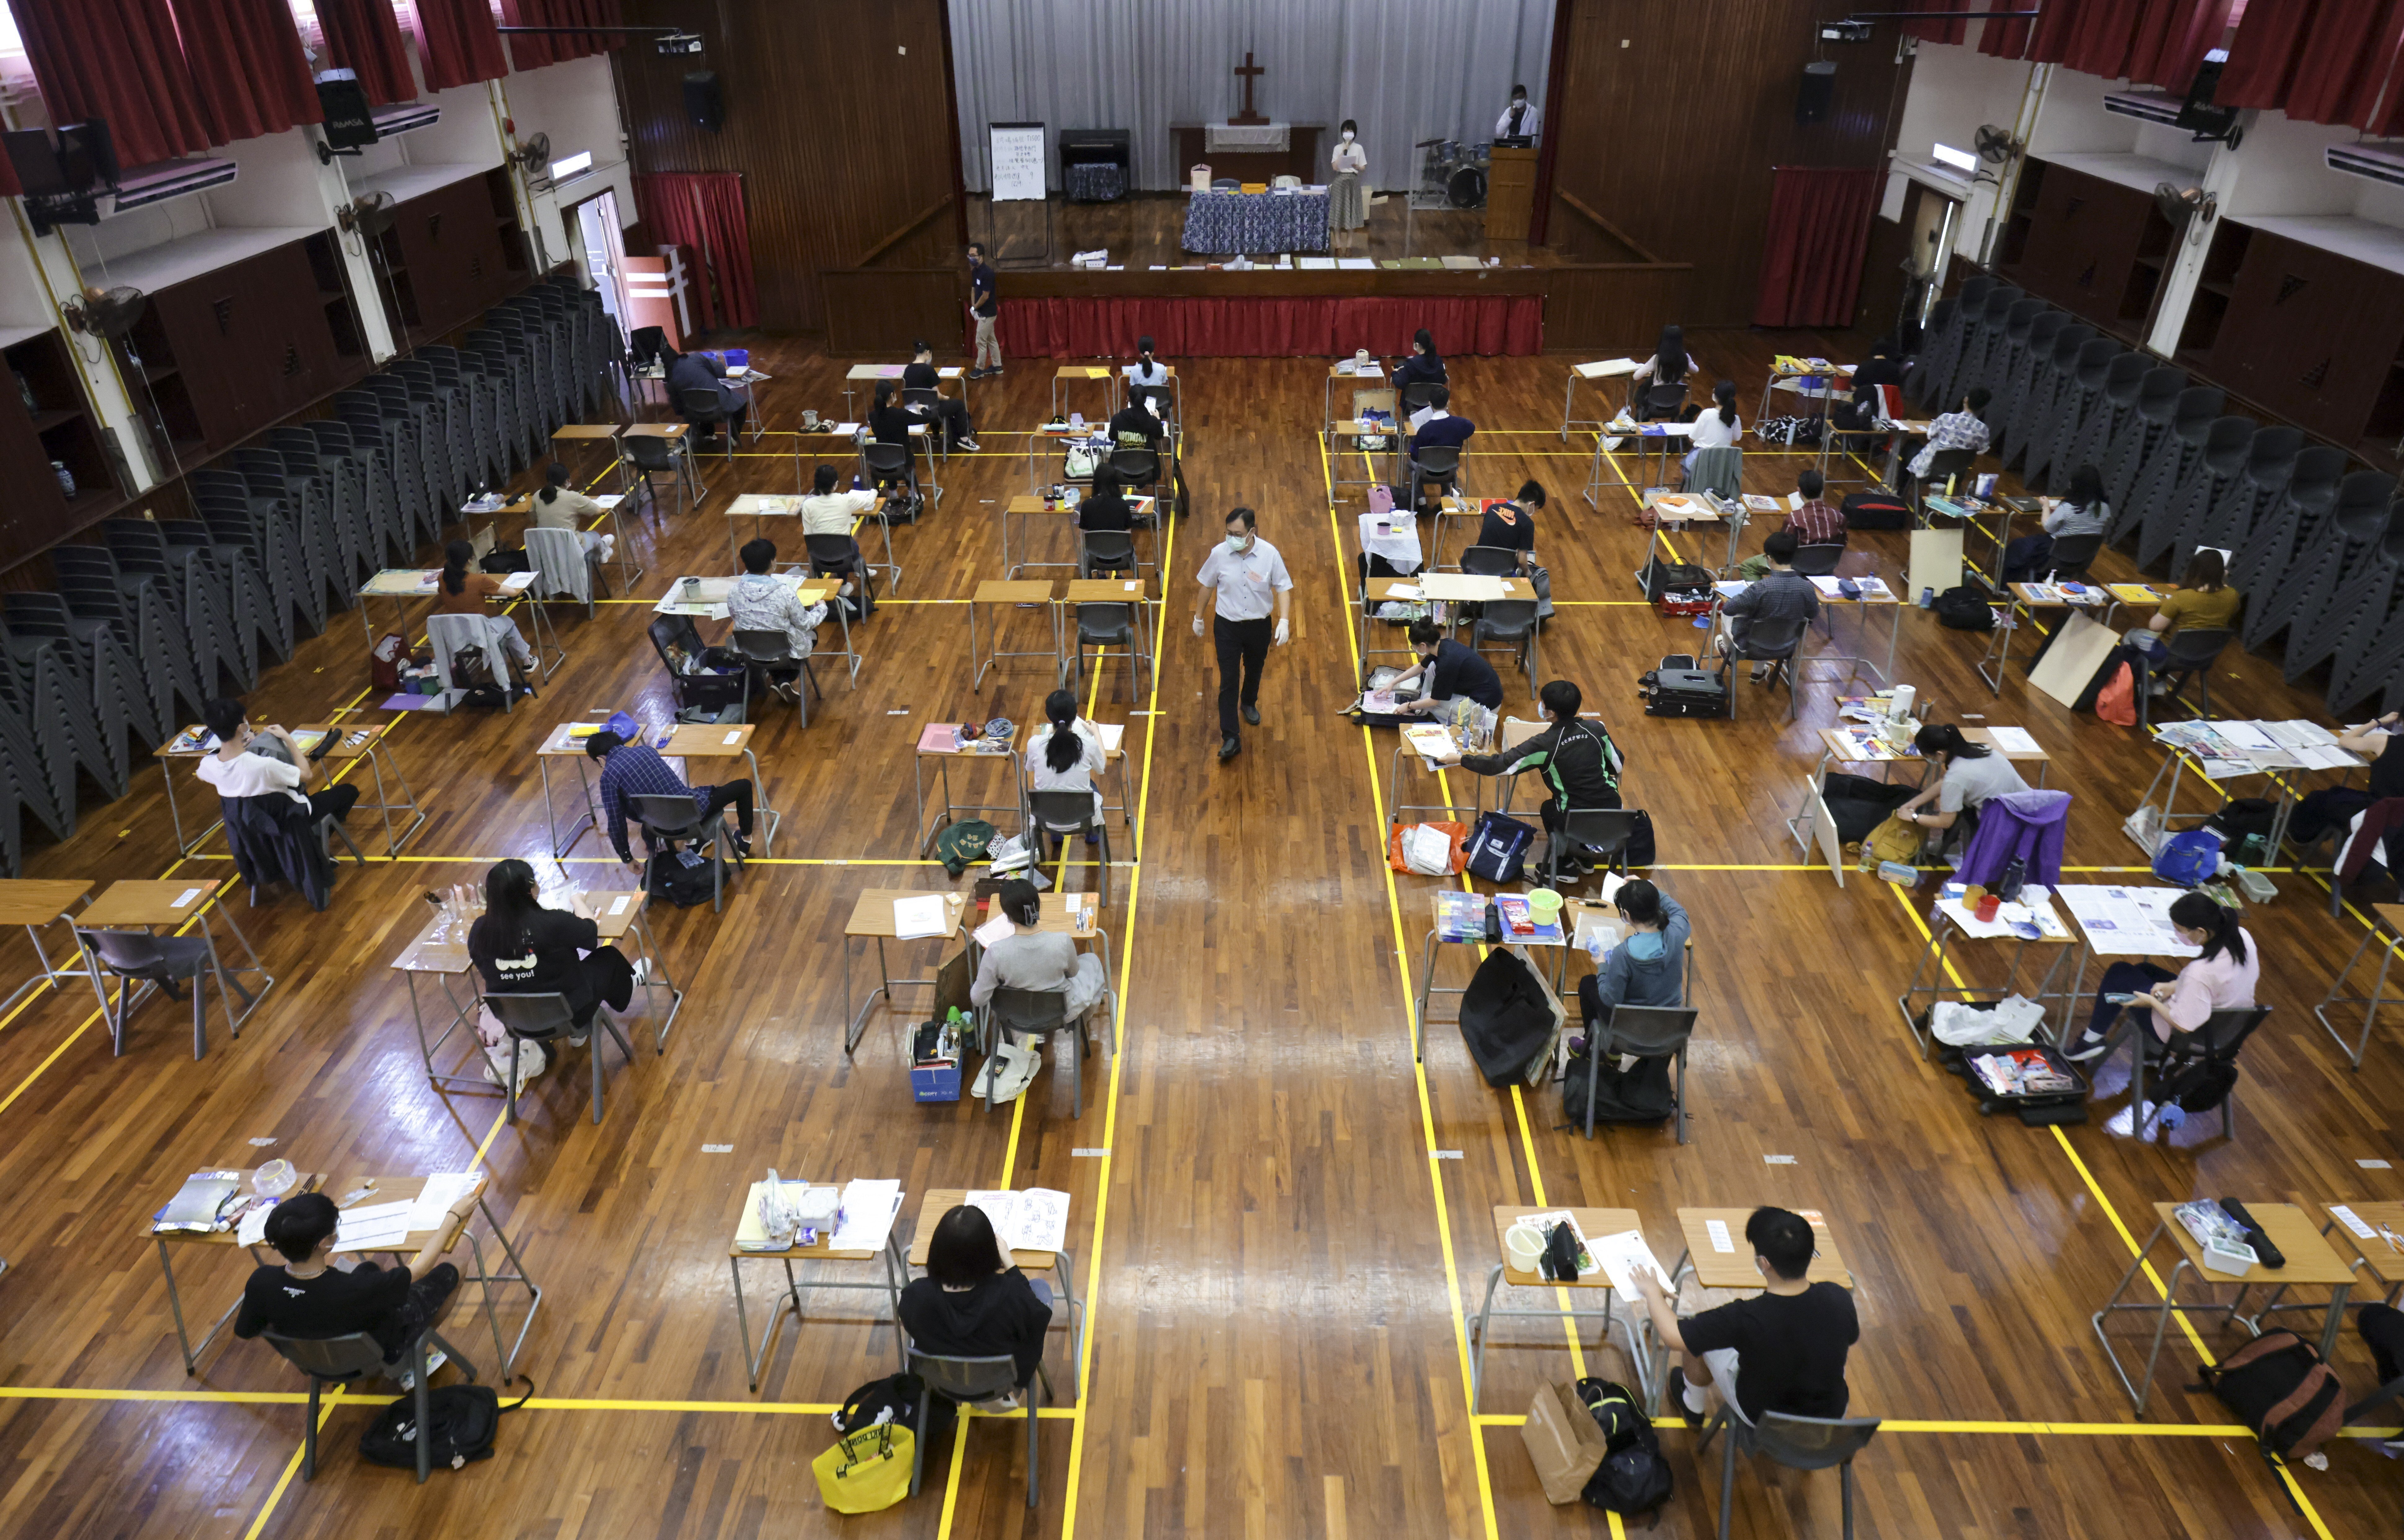 Nearly 50,000 students sat for this year's DSE exams - the fewest since they were introduced in 2012. Photo: SCMP/ May Tse